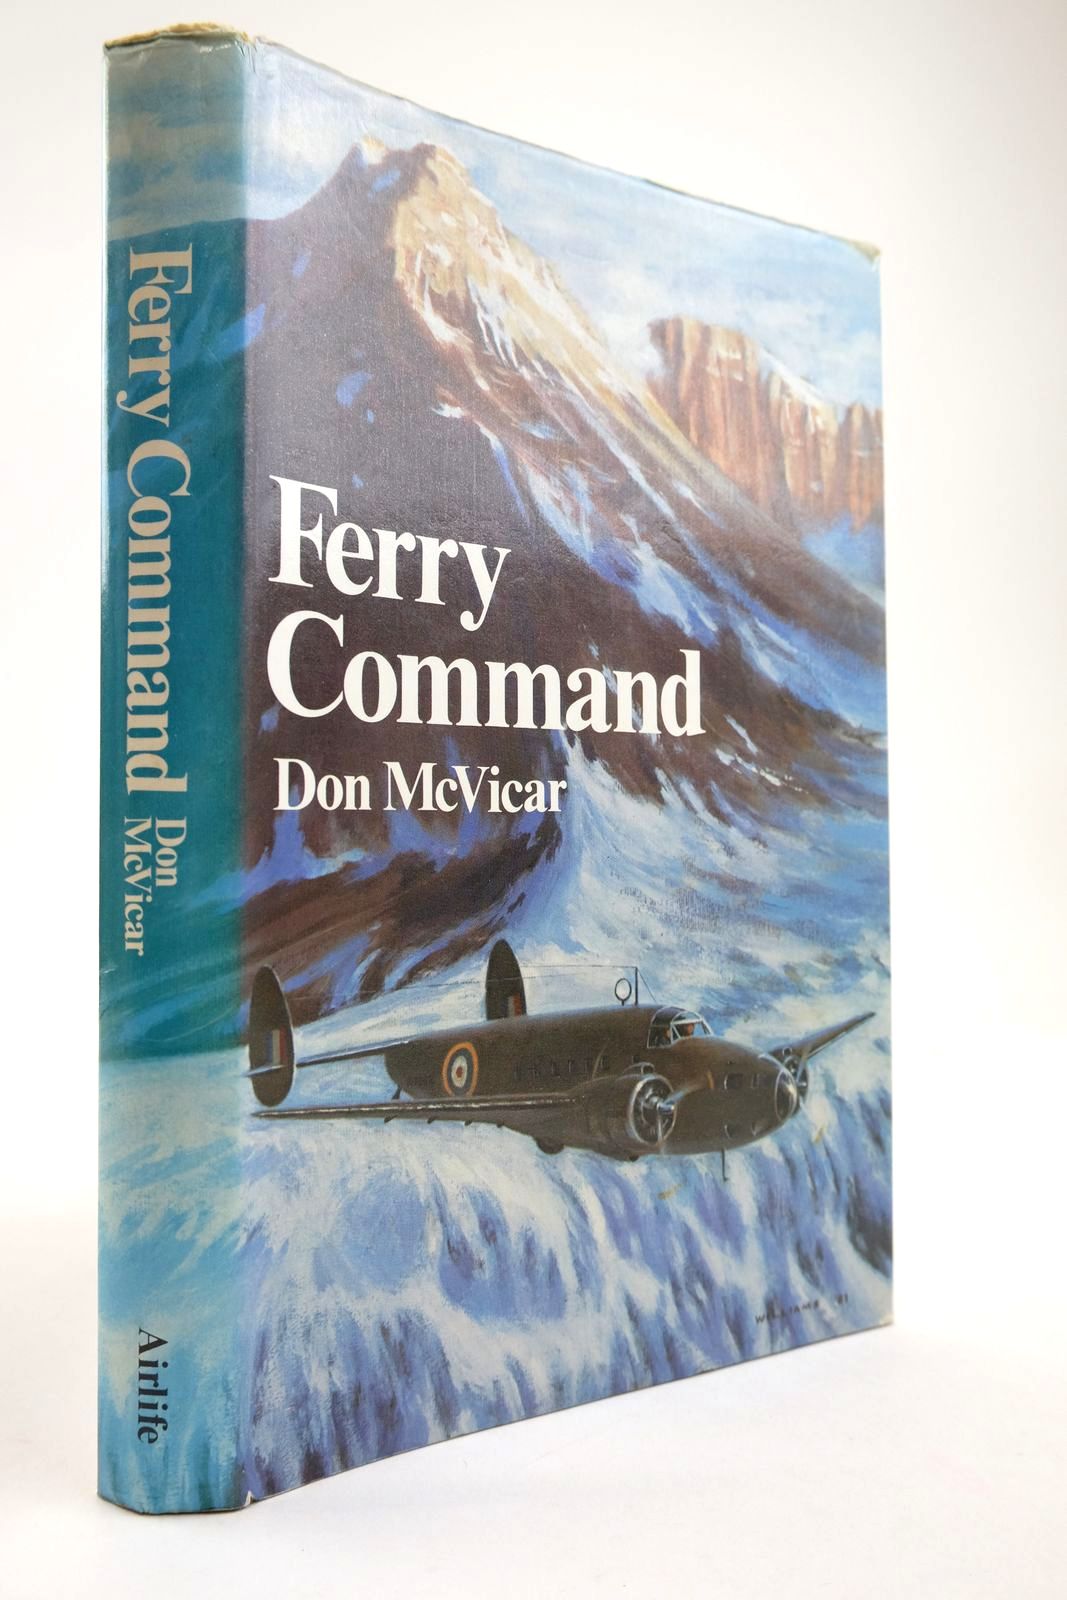 Photo of FERRY COMMAND written by McVicar, Don illustrated by Williams, L.R. published by Airlife (STOCK CODE: 2134088)  for sale by Stella & Rose's Books